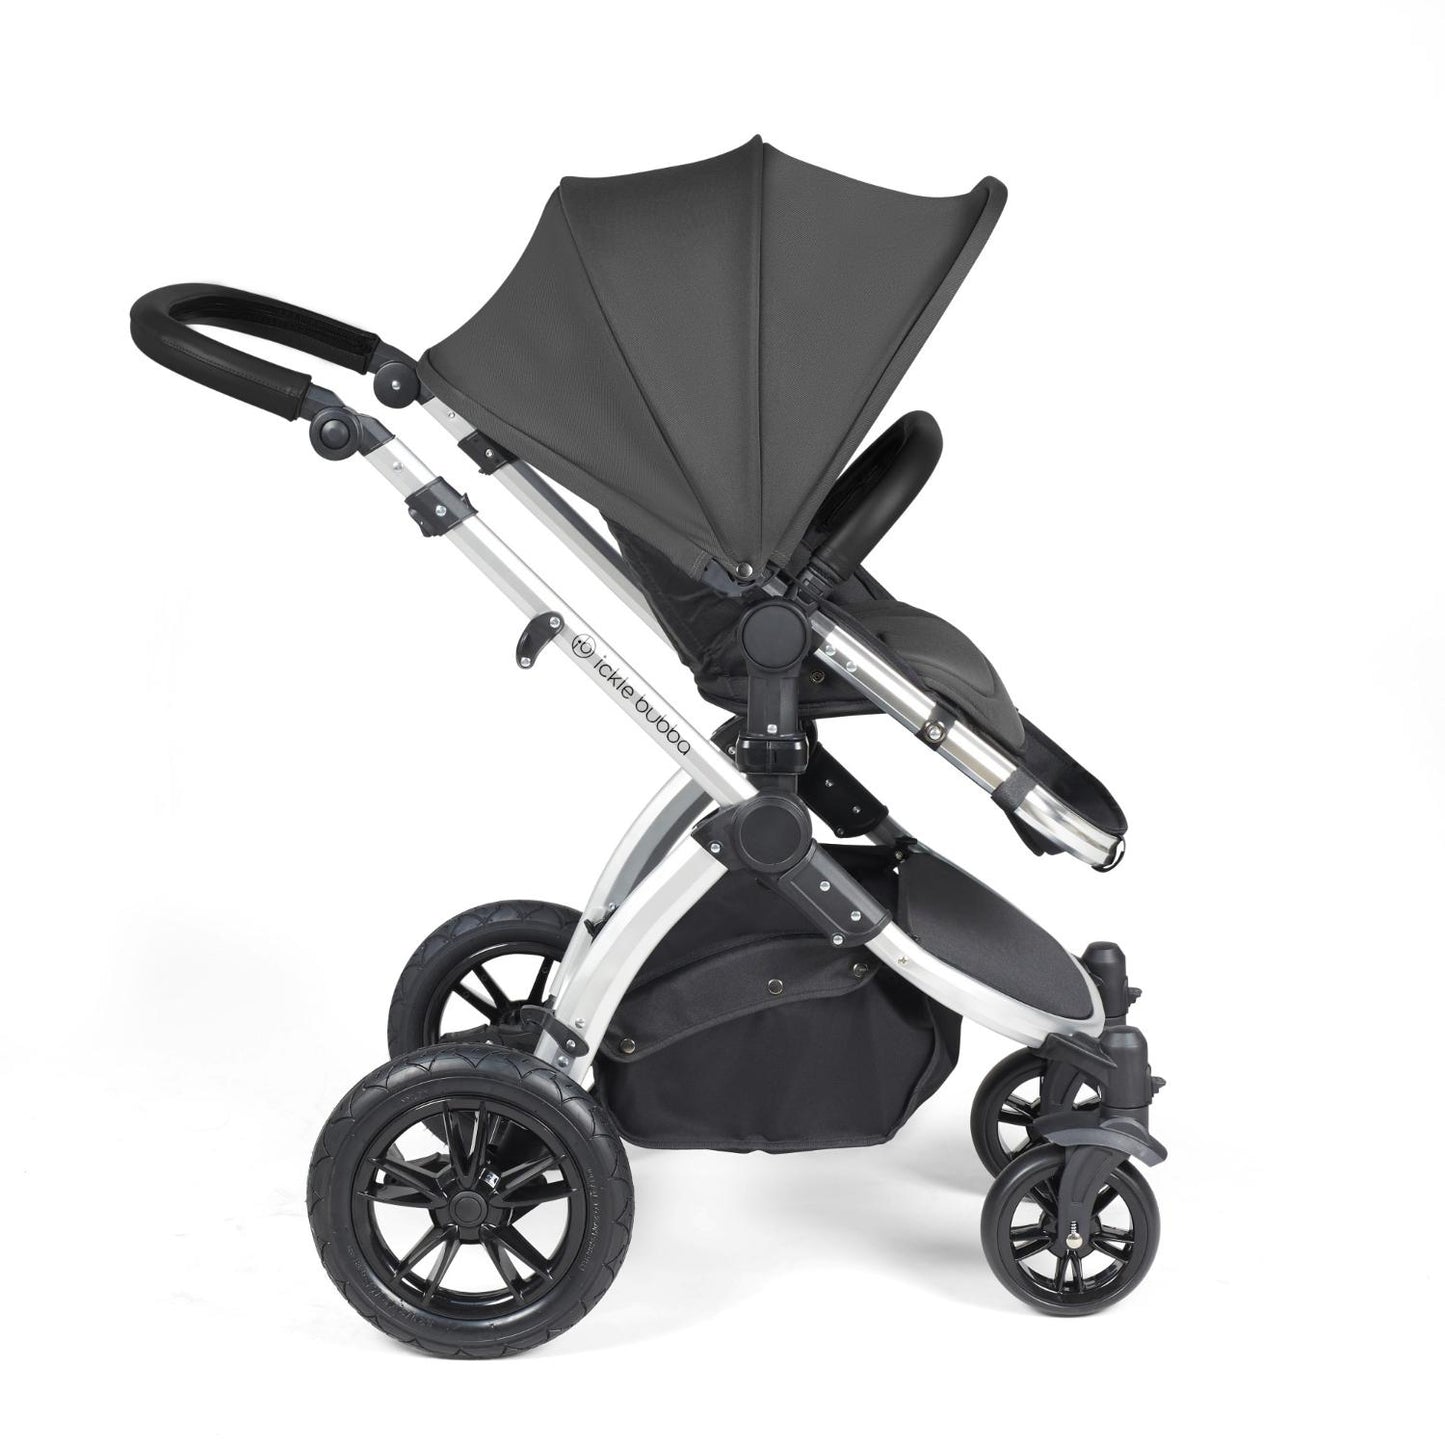 Side view of Ickle Bubba Stomp Luxe Pushchair with seat unit attached in Charcoal Grey colour with silver chassis